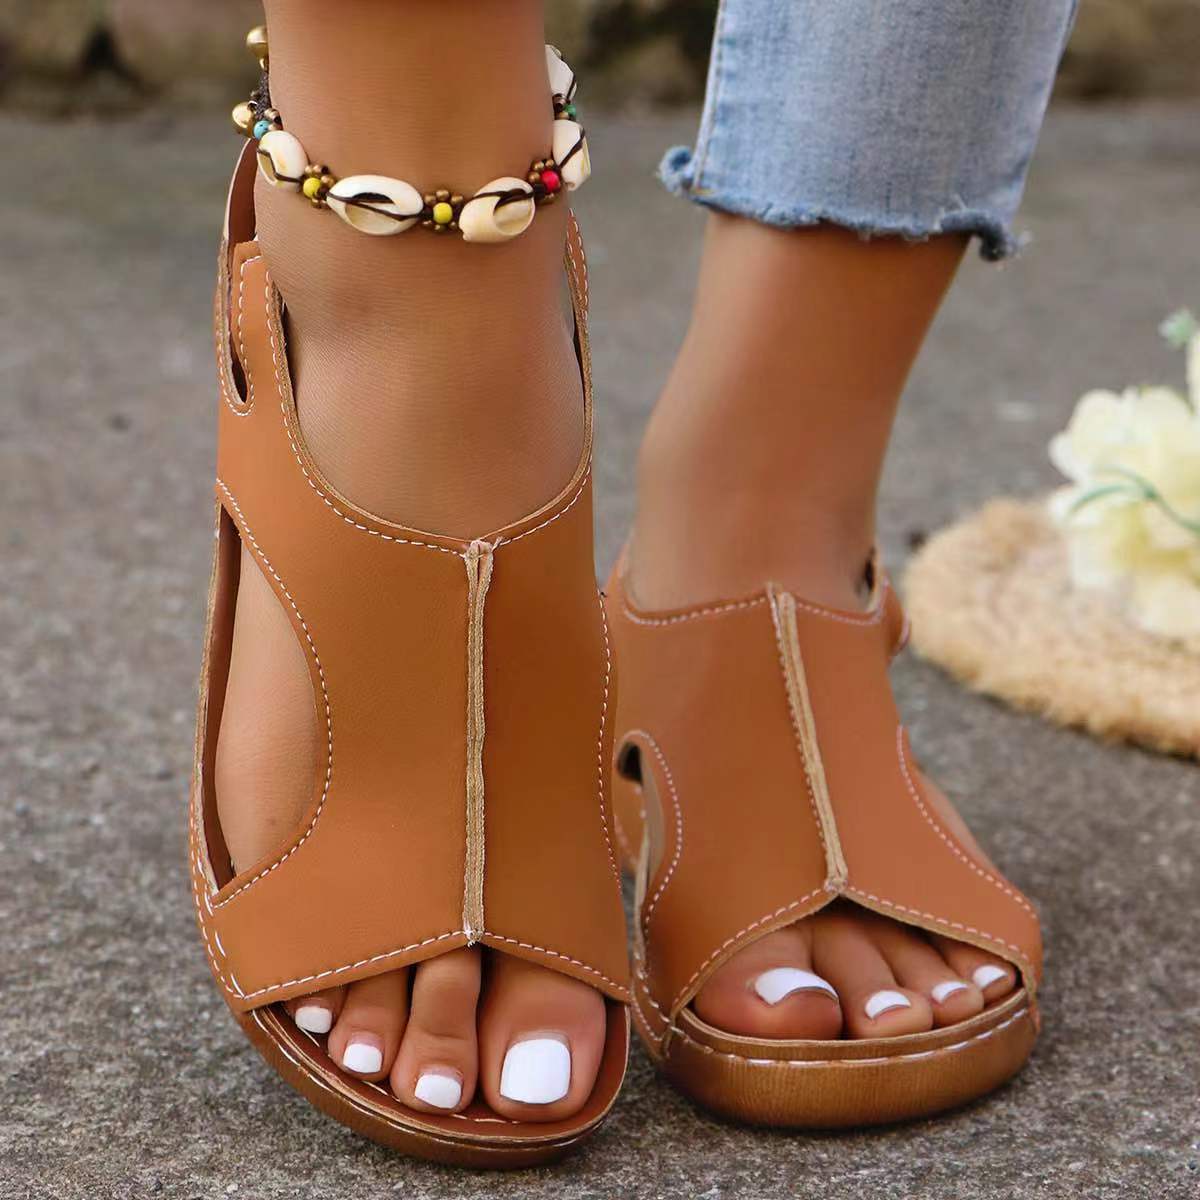 New Summer Wedges Sandals With Elastic Band Design Casual Fish Mouth Shoes For Women